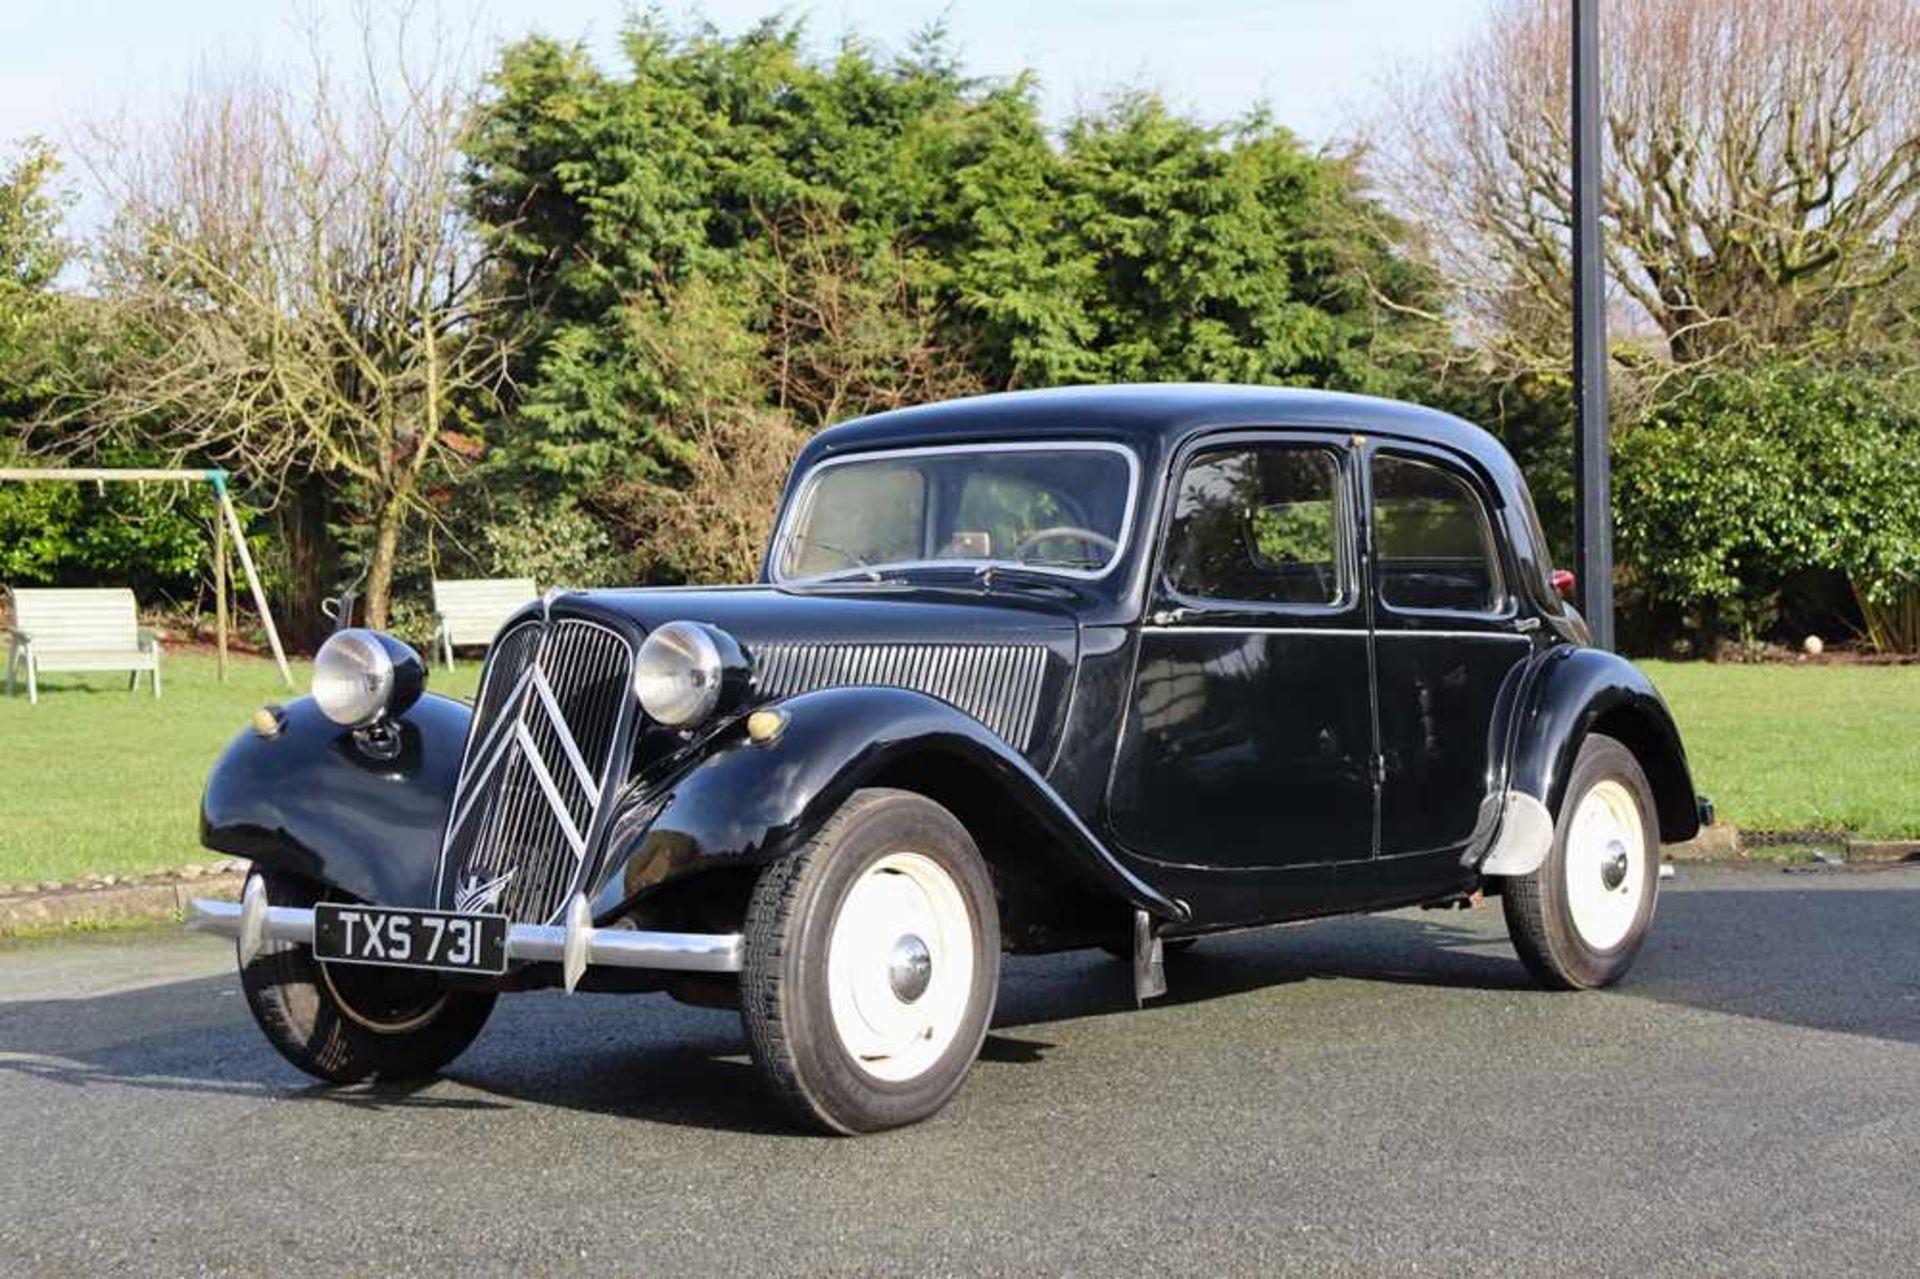 1952 Citroën 11BL Traction Avant In current ownership for over 40 years - Image 4 of 60